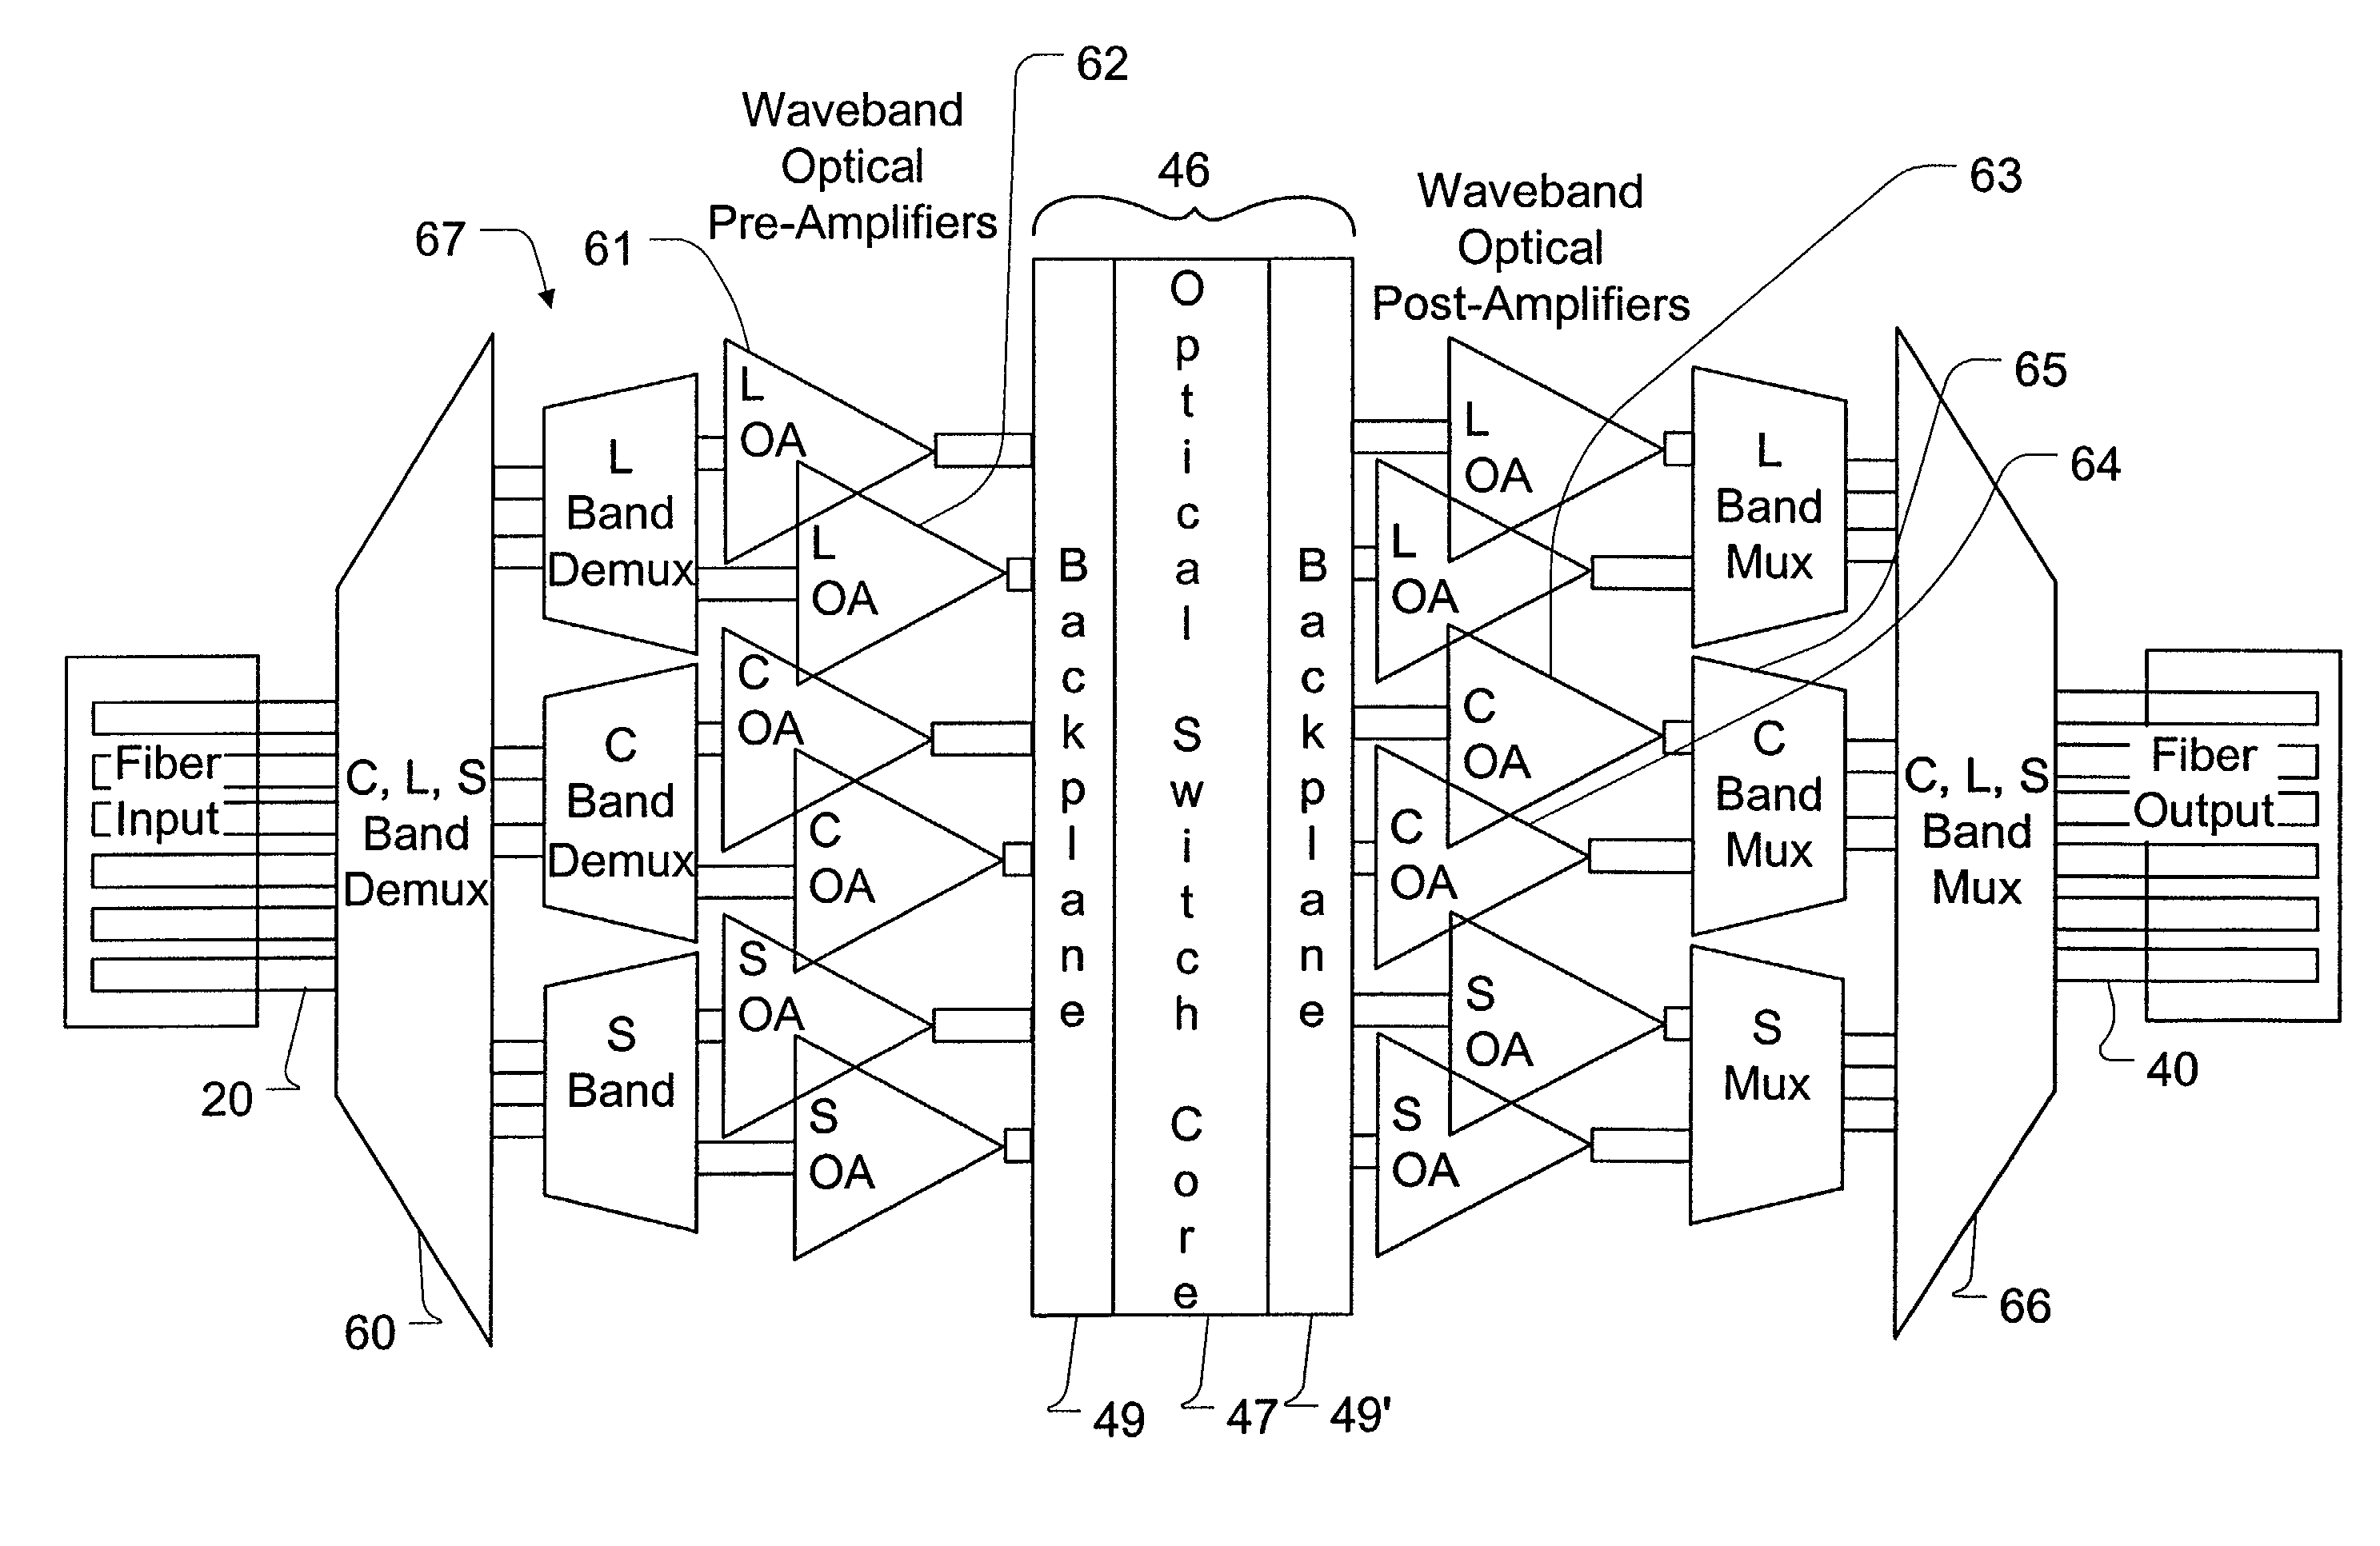 Optical amplification in photonic switched crossconnect systems